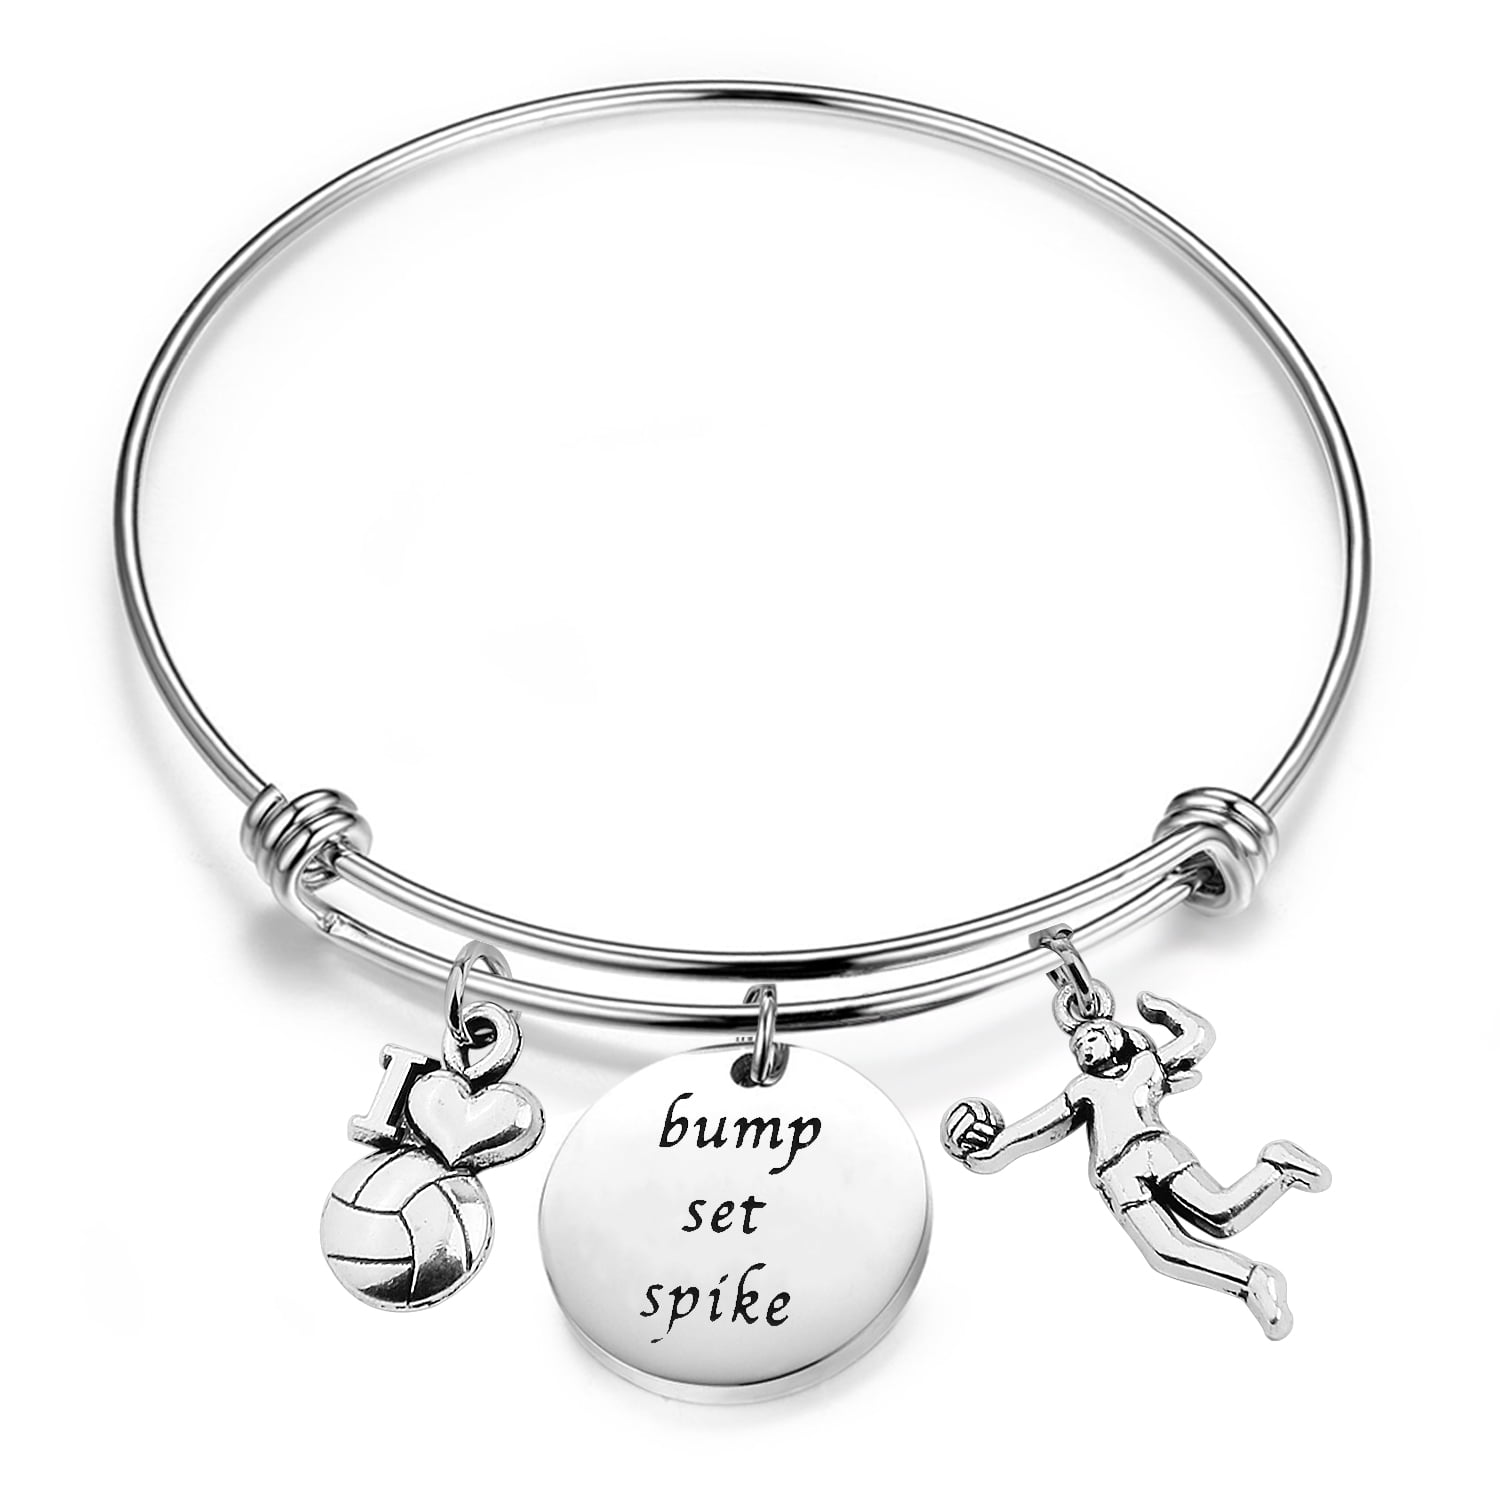 SATINIOR 2 Pieces Volleyball Softball Charm Bangle Bracelet Jewelry Gift for Ball Players